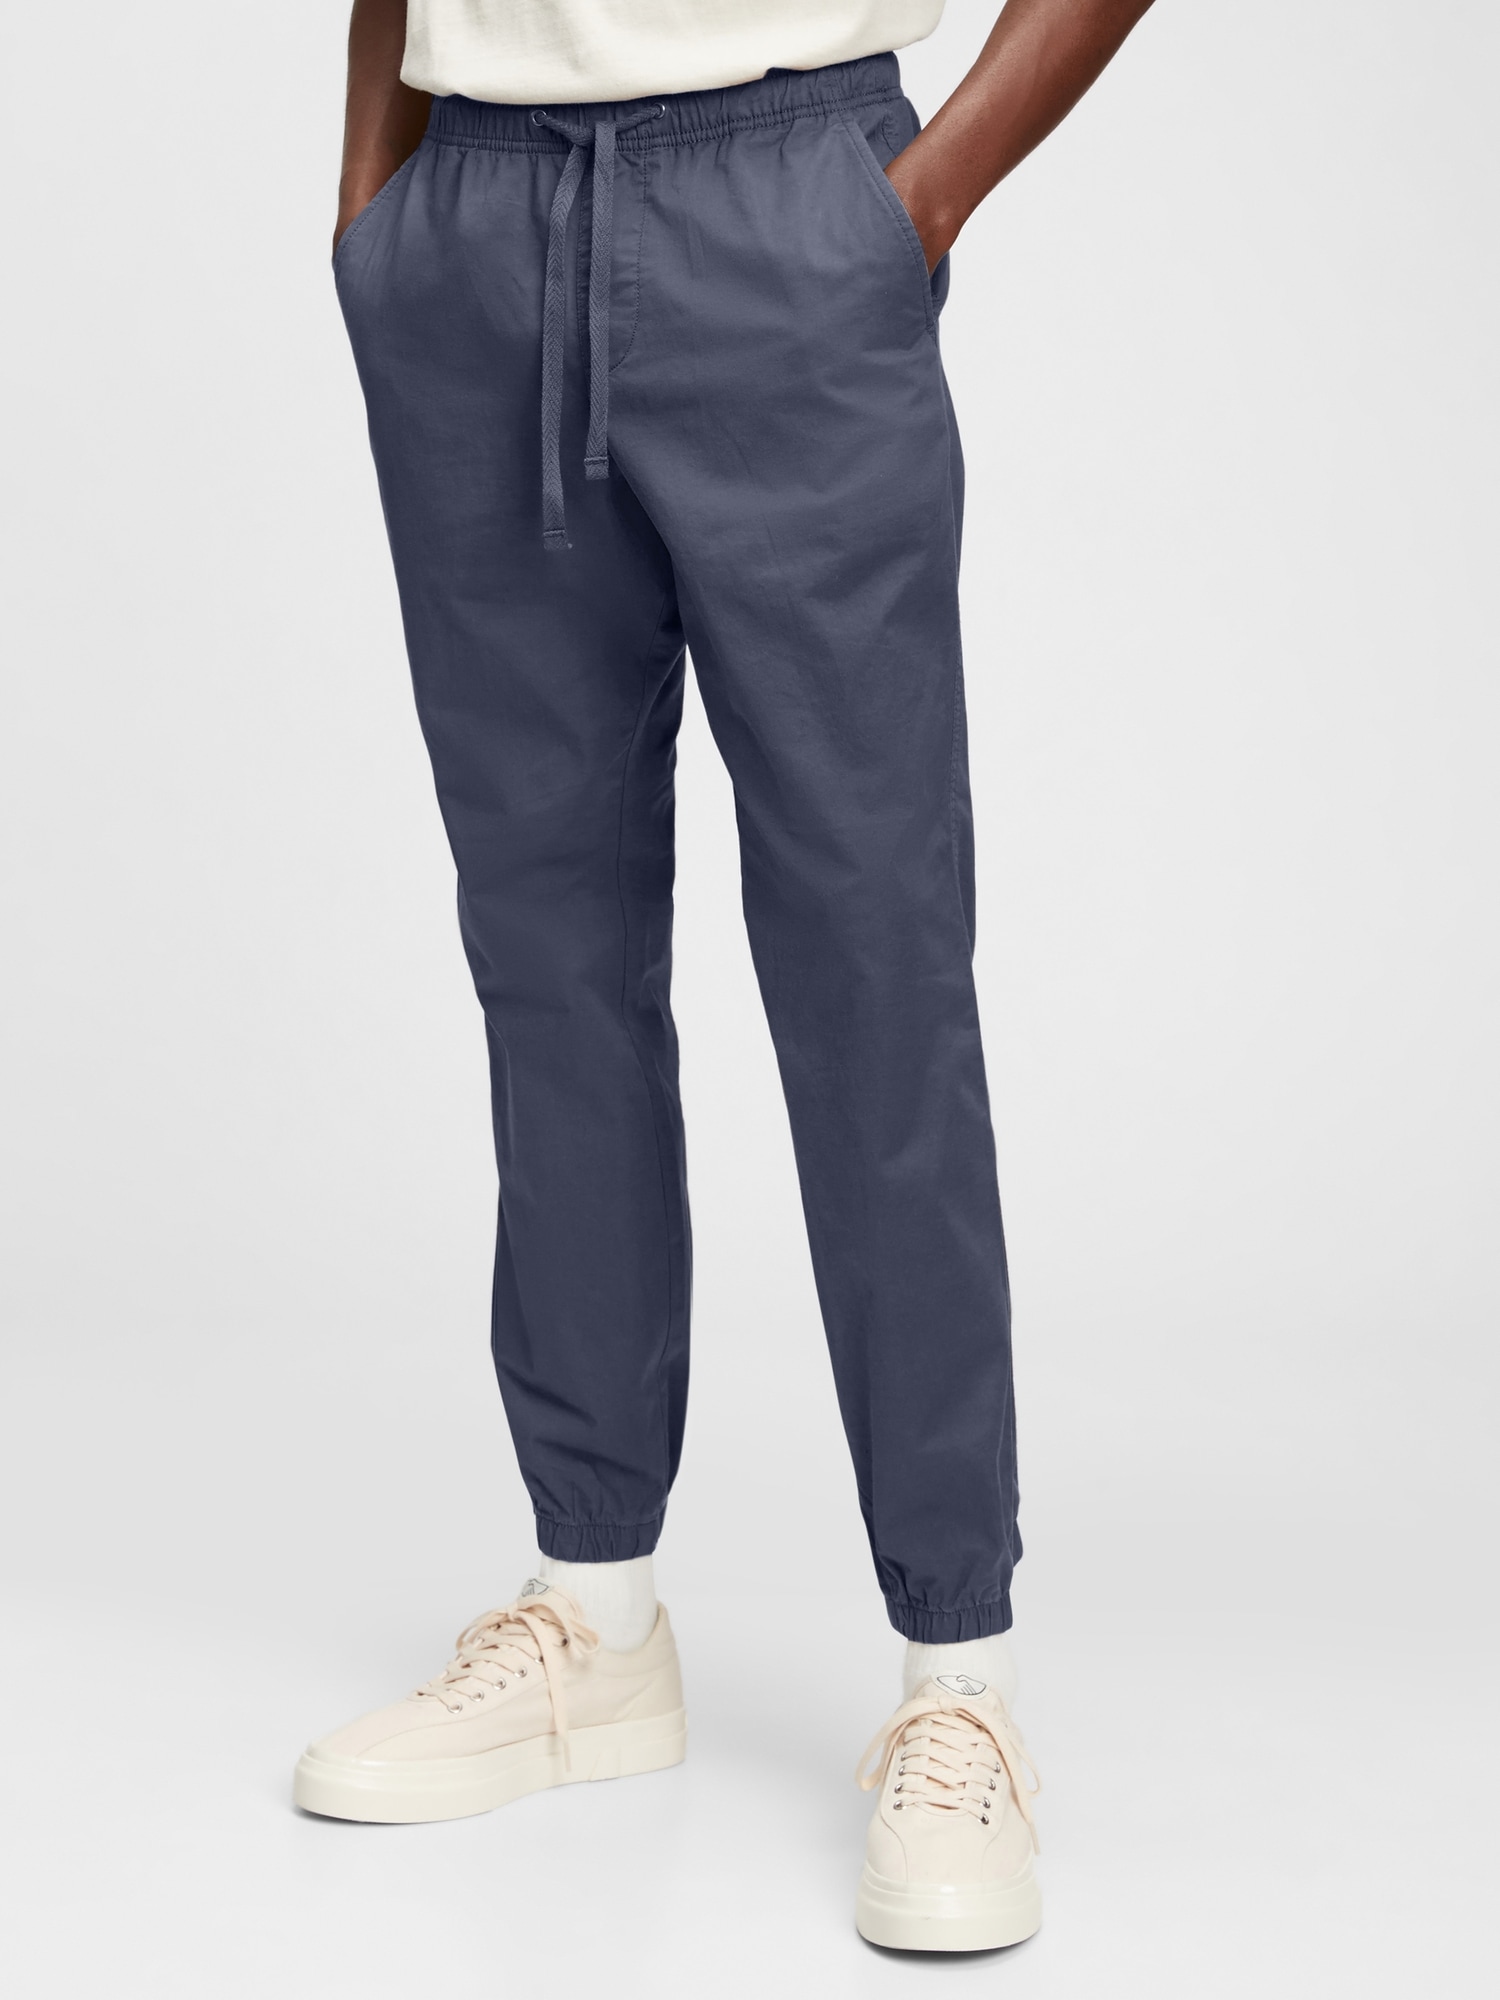 Gap Slim Canvas Joggers With Flex In New Classic Navy Blue